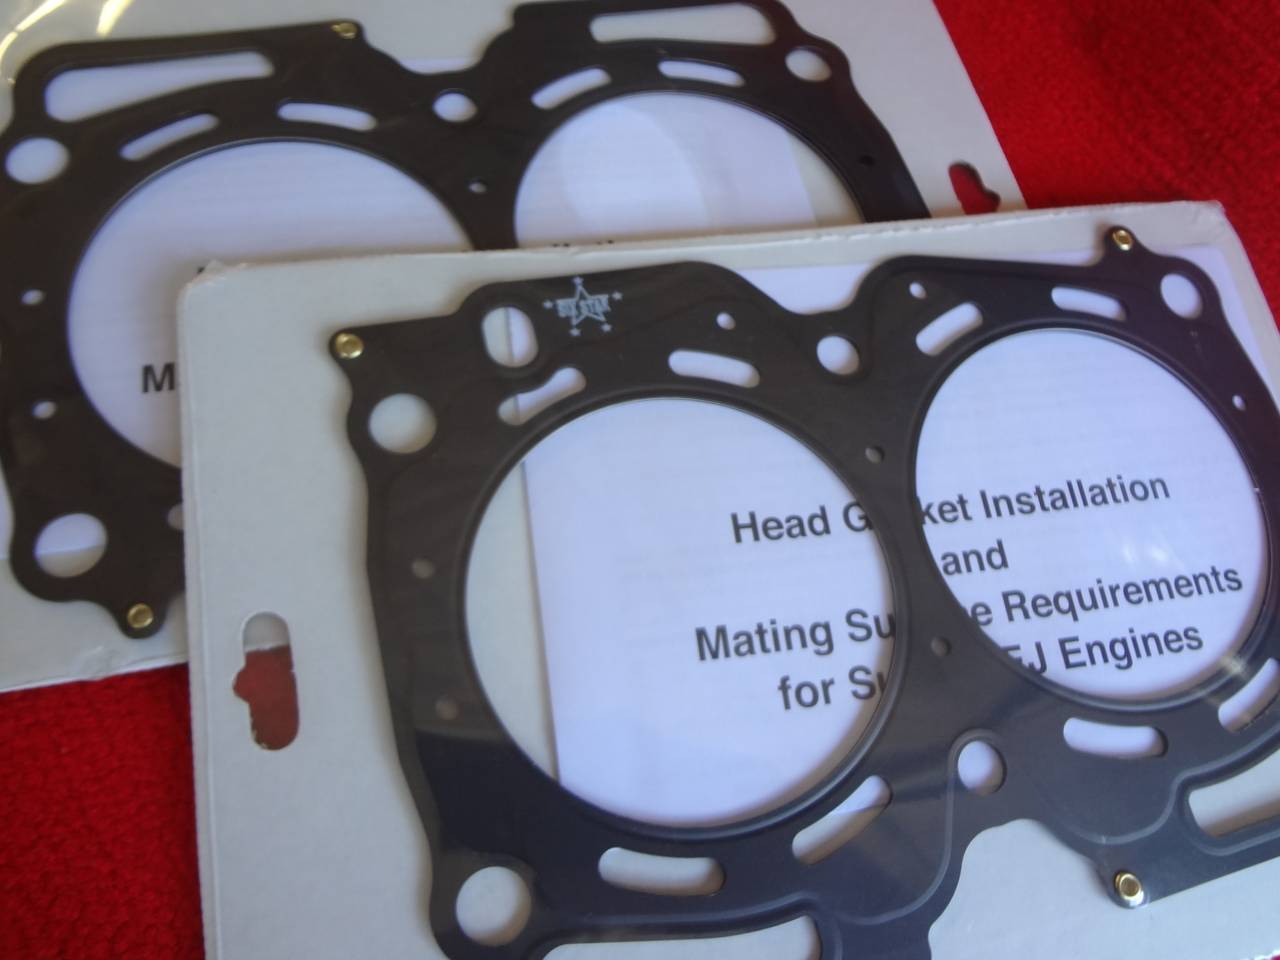 Head Gaskets & More!